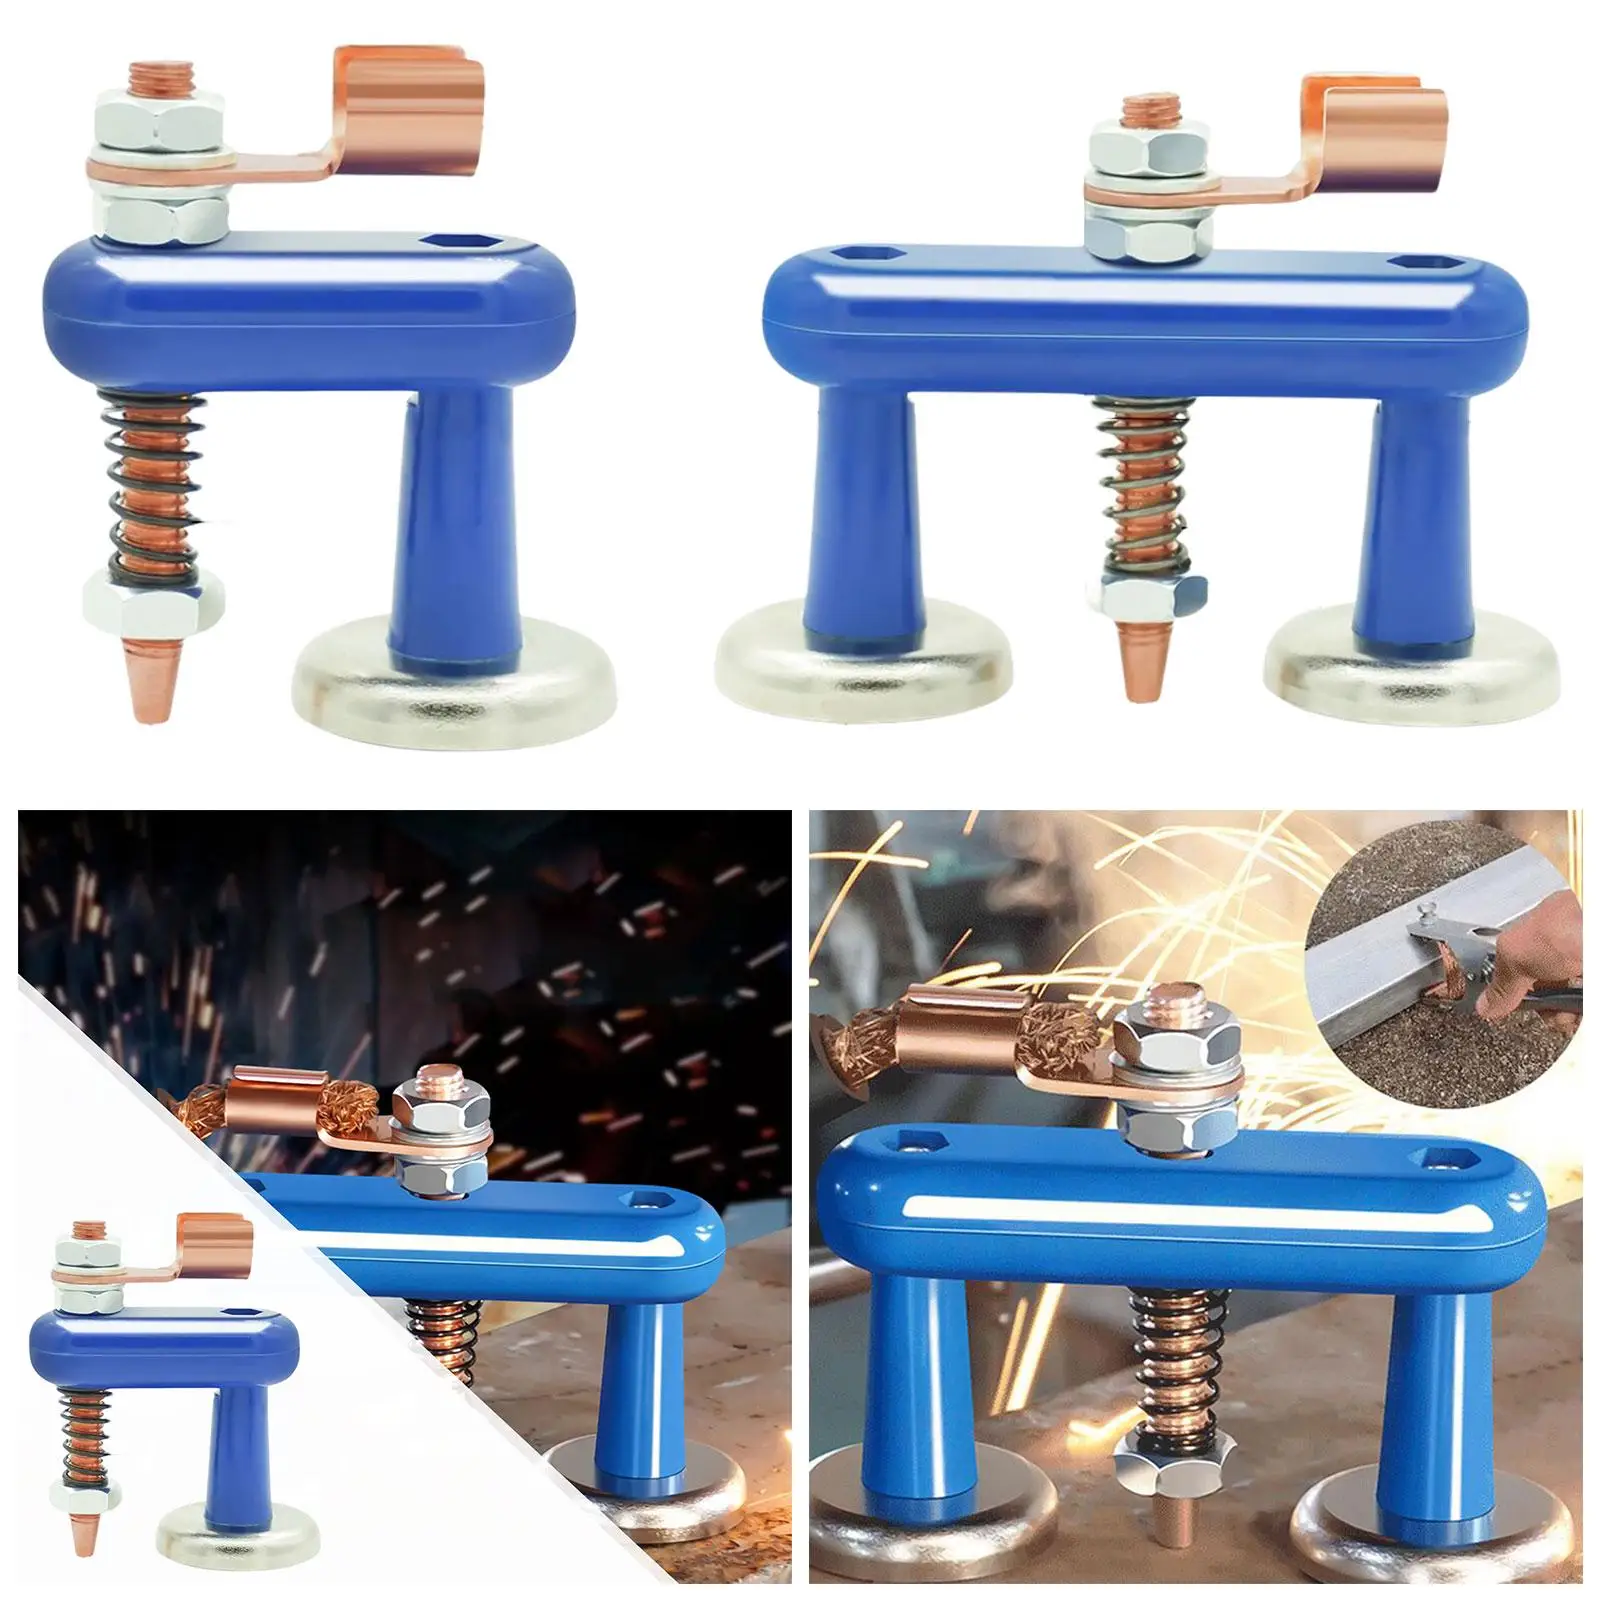 Professional Grounding Clamp Repair Tools Support Ground Clamp Holder for Welding Machine Electrode Holder Welding Processing